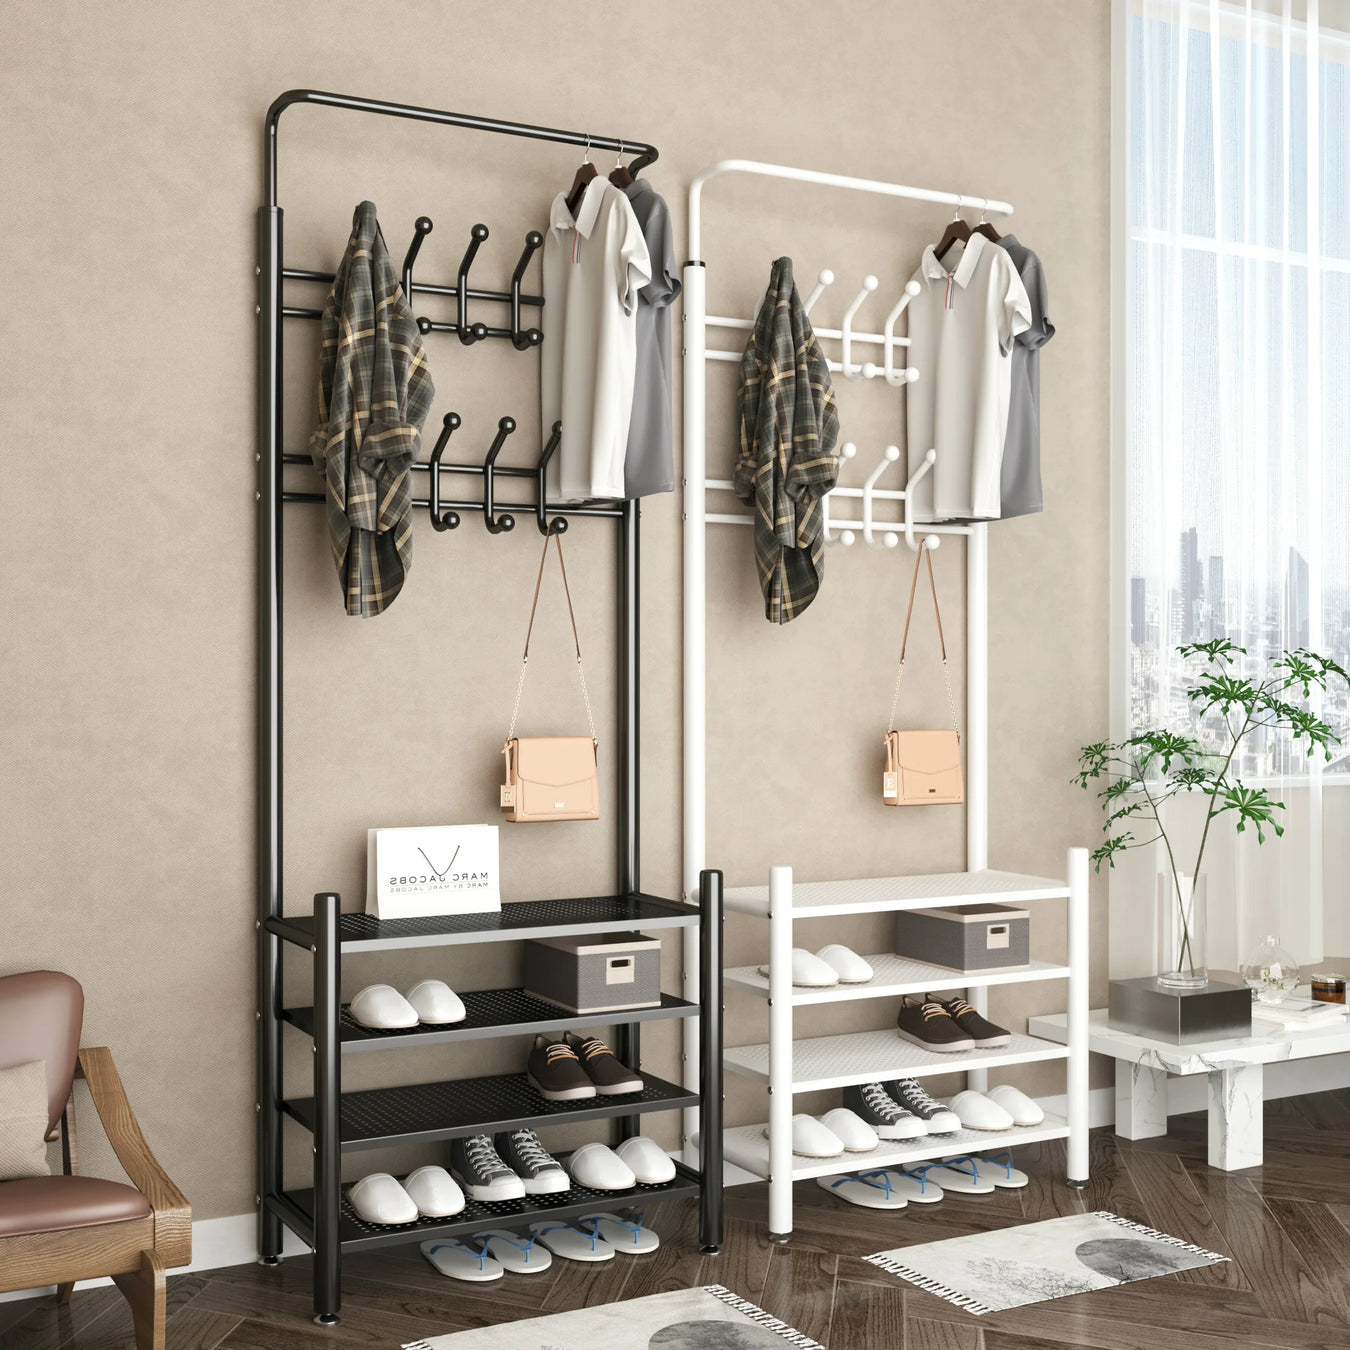 Contemporary Shoe and Coat Storage Rack with Hooks - Versatile Multi-tier Organizer for Entryways and Closets